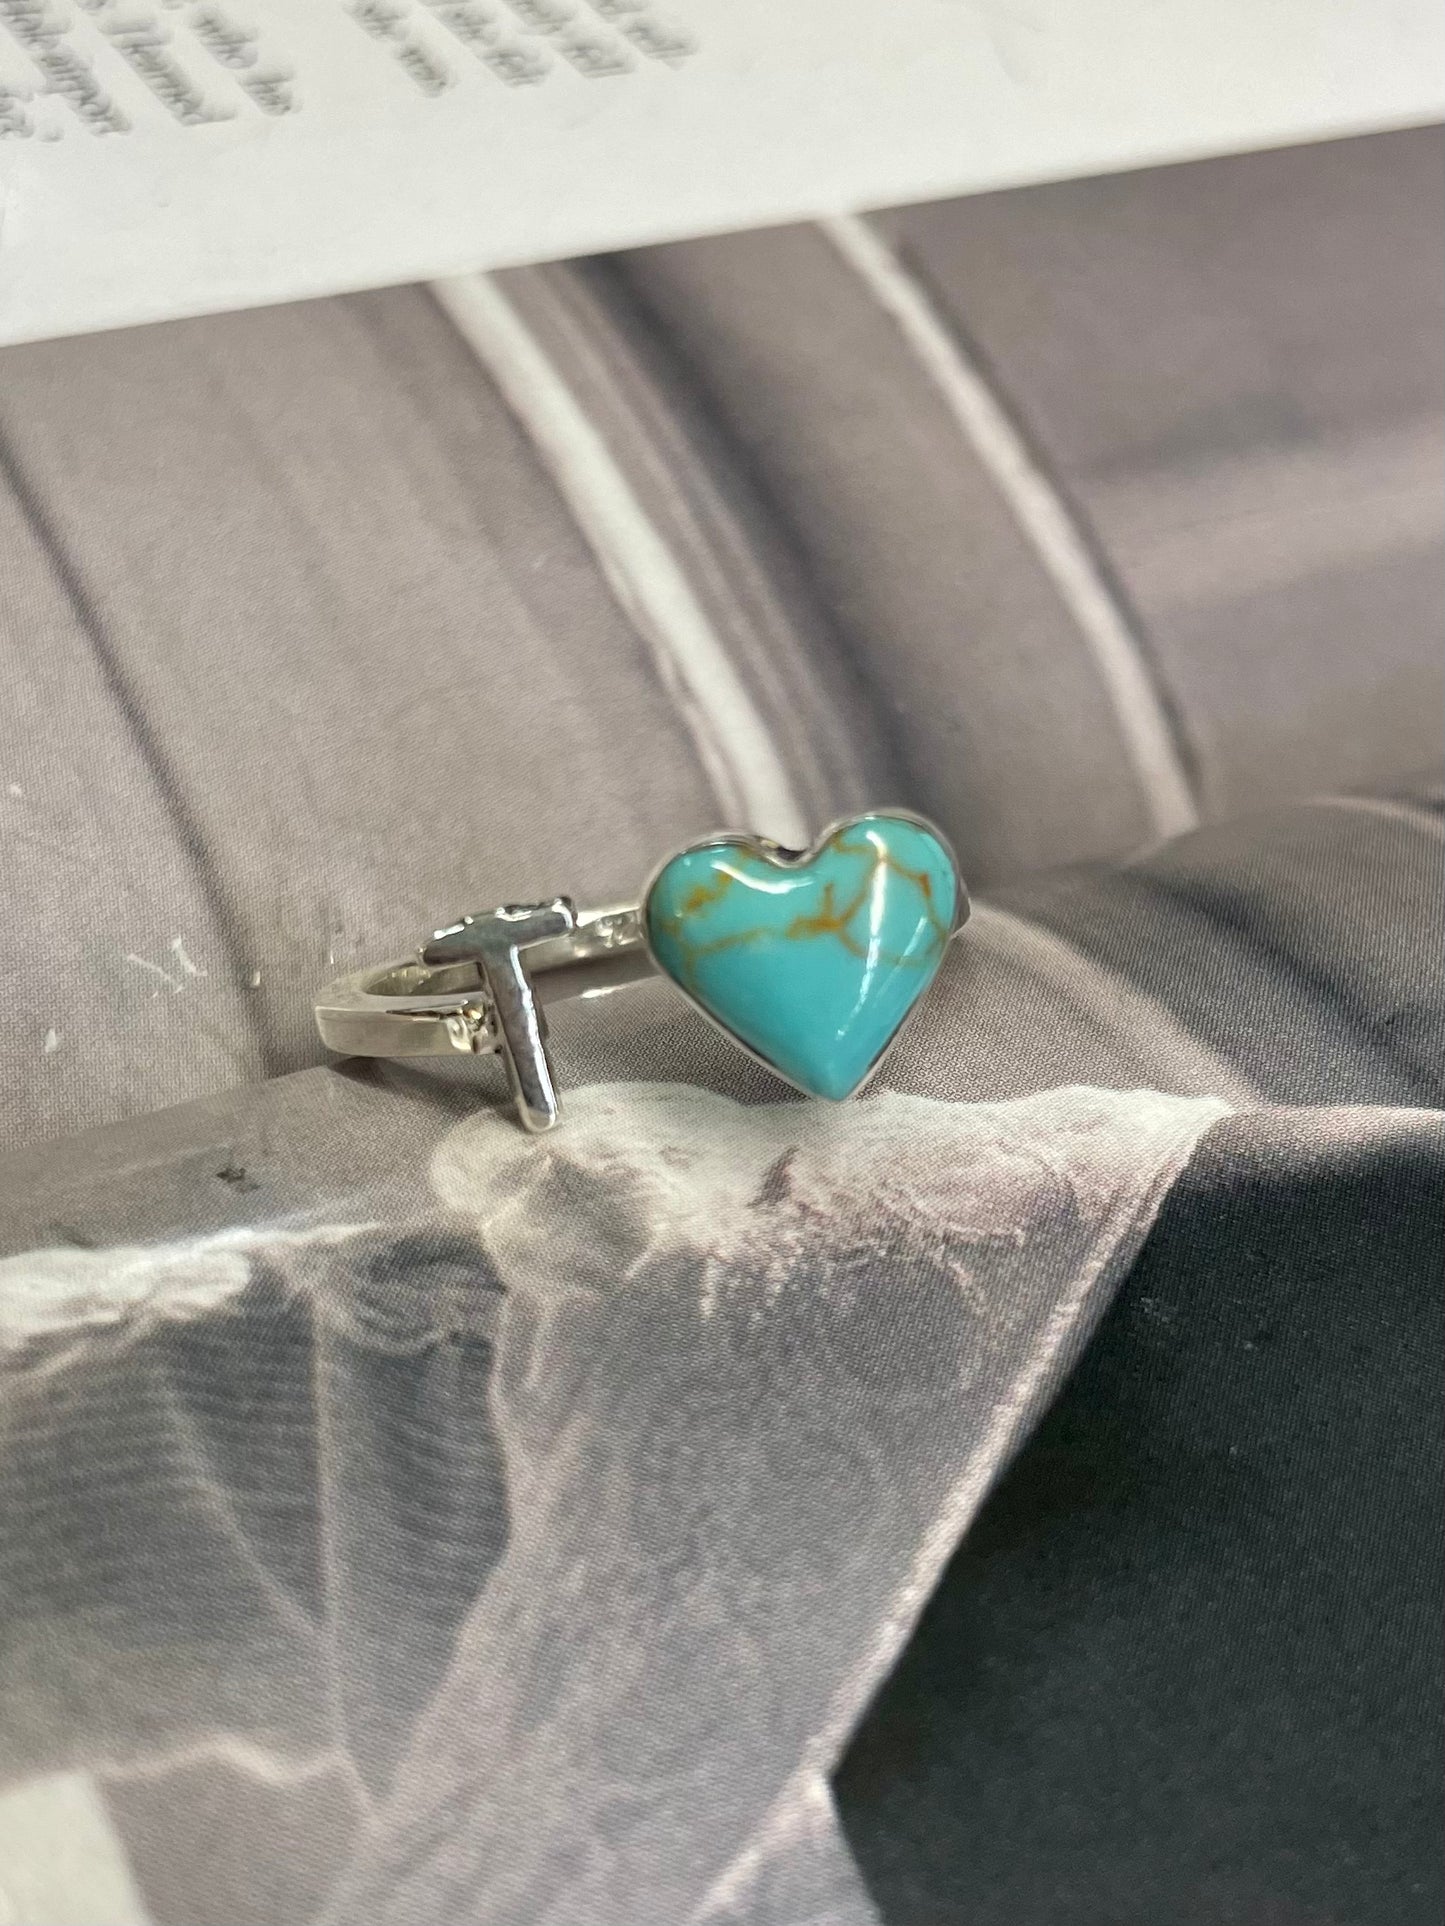 The Heart Letter Ring - Size 6-8